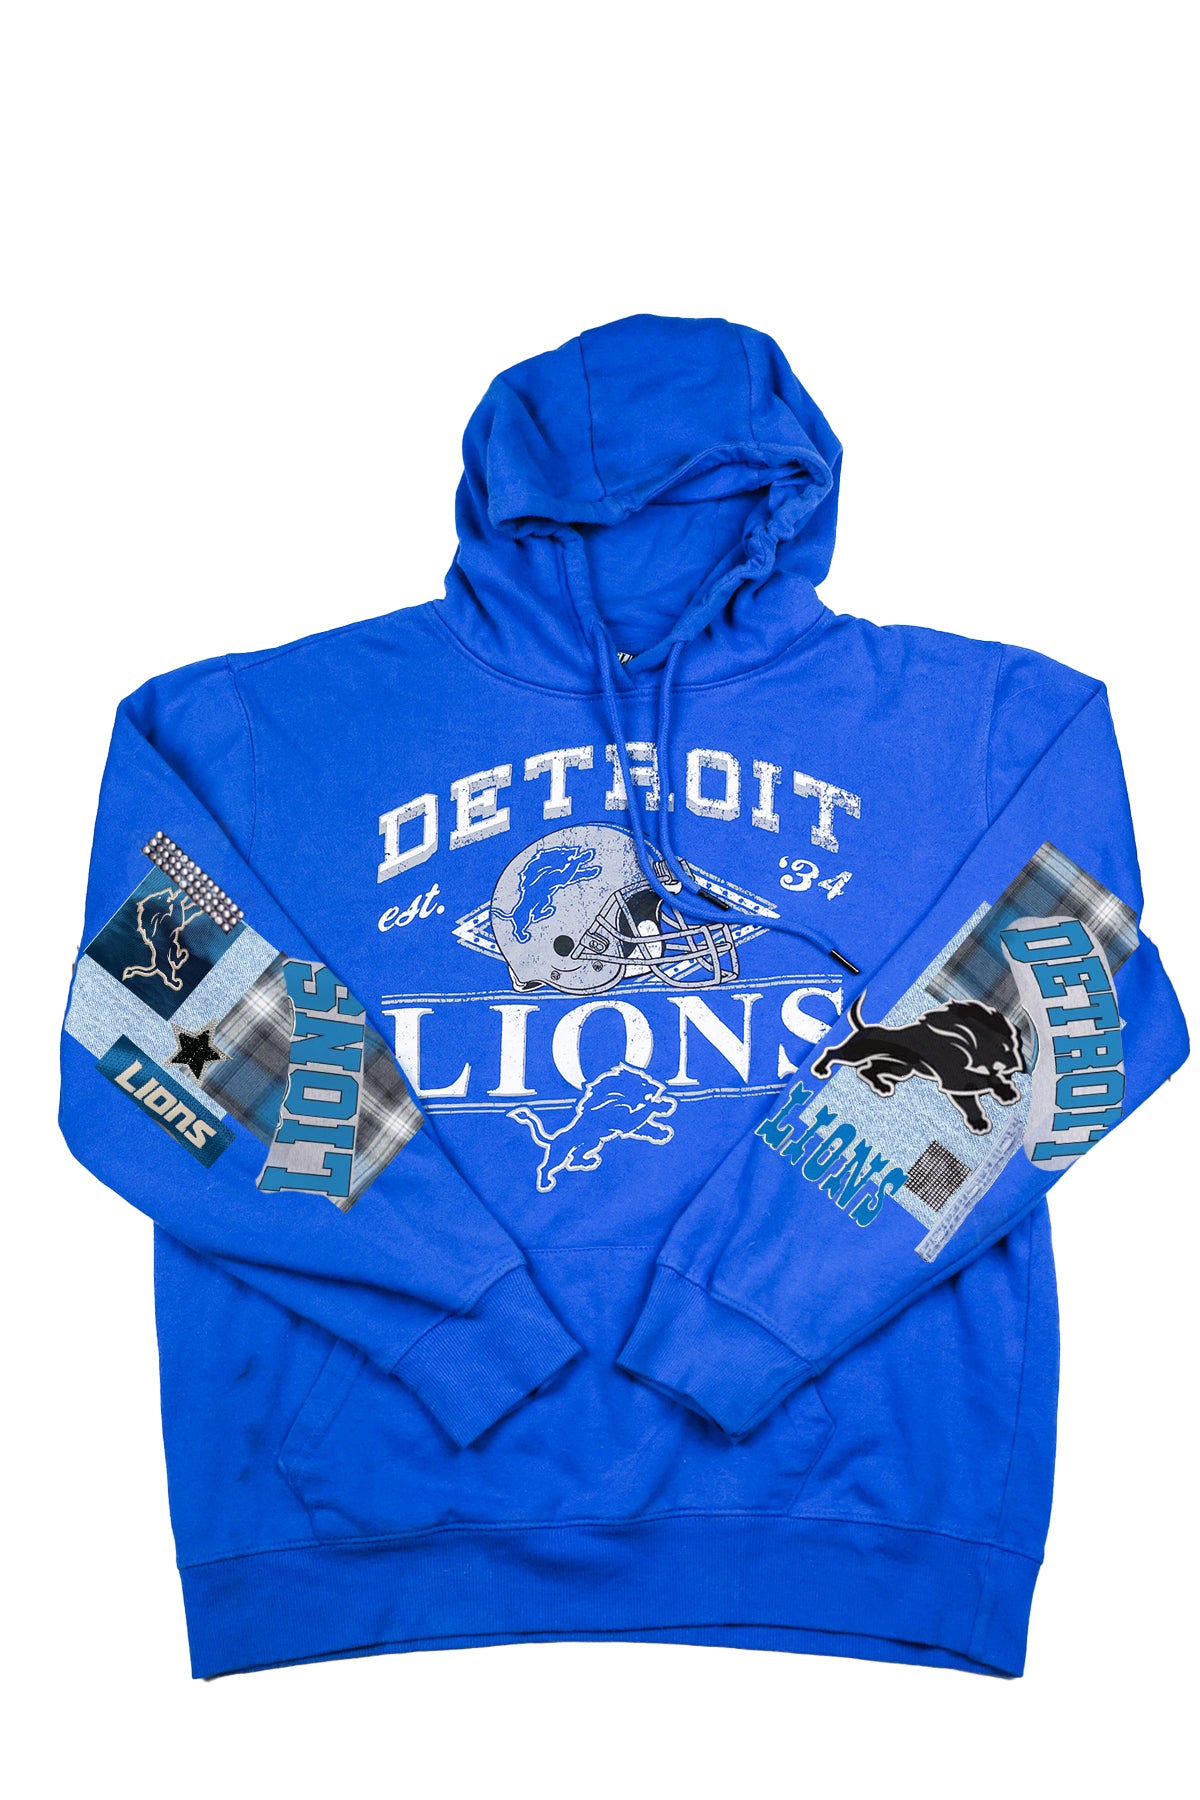 Upcycled Custom Order Lions Patchwork Sweatshirt for Kennedy